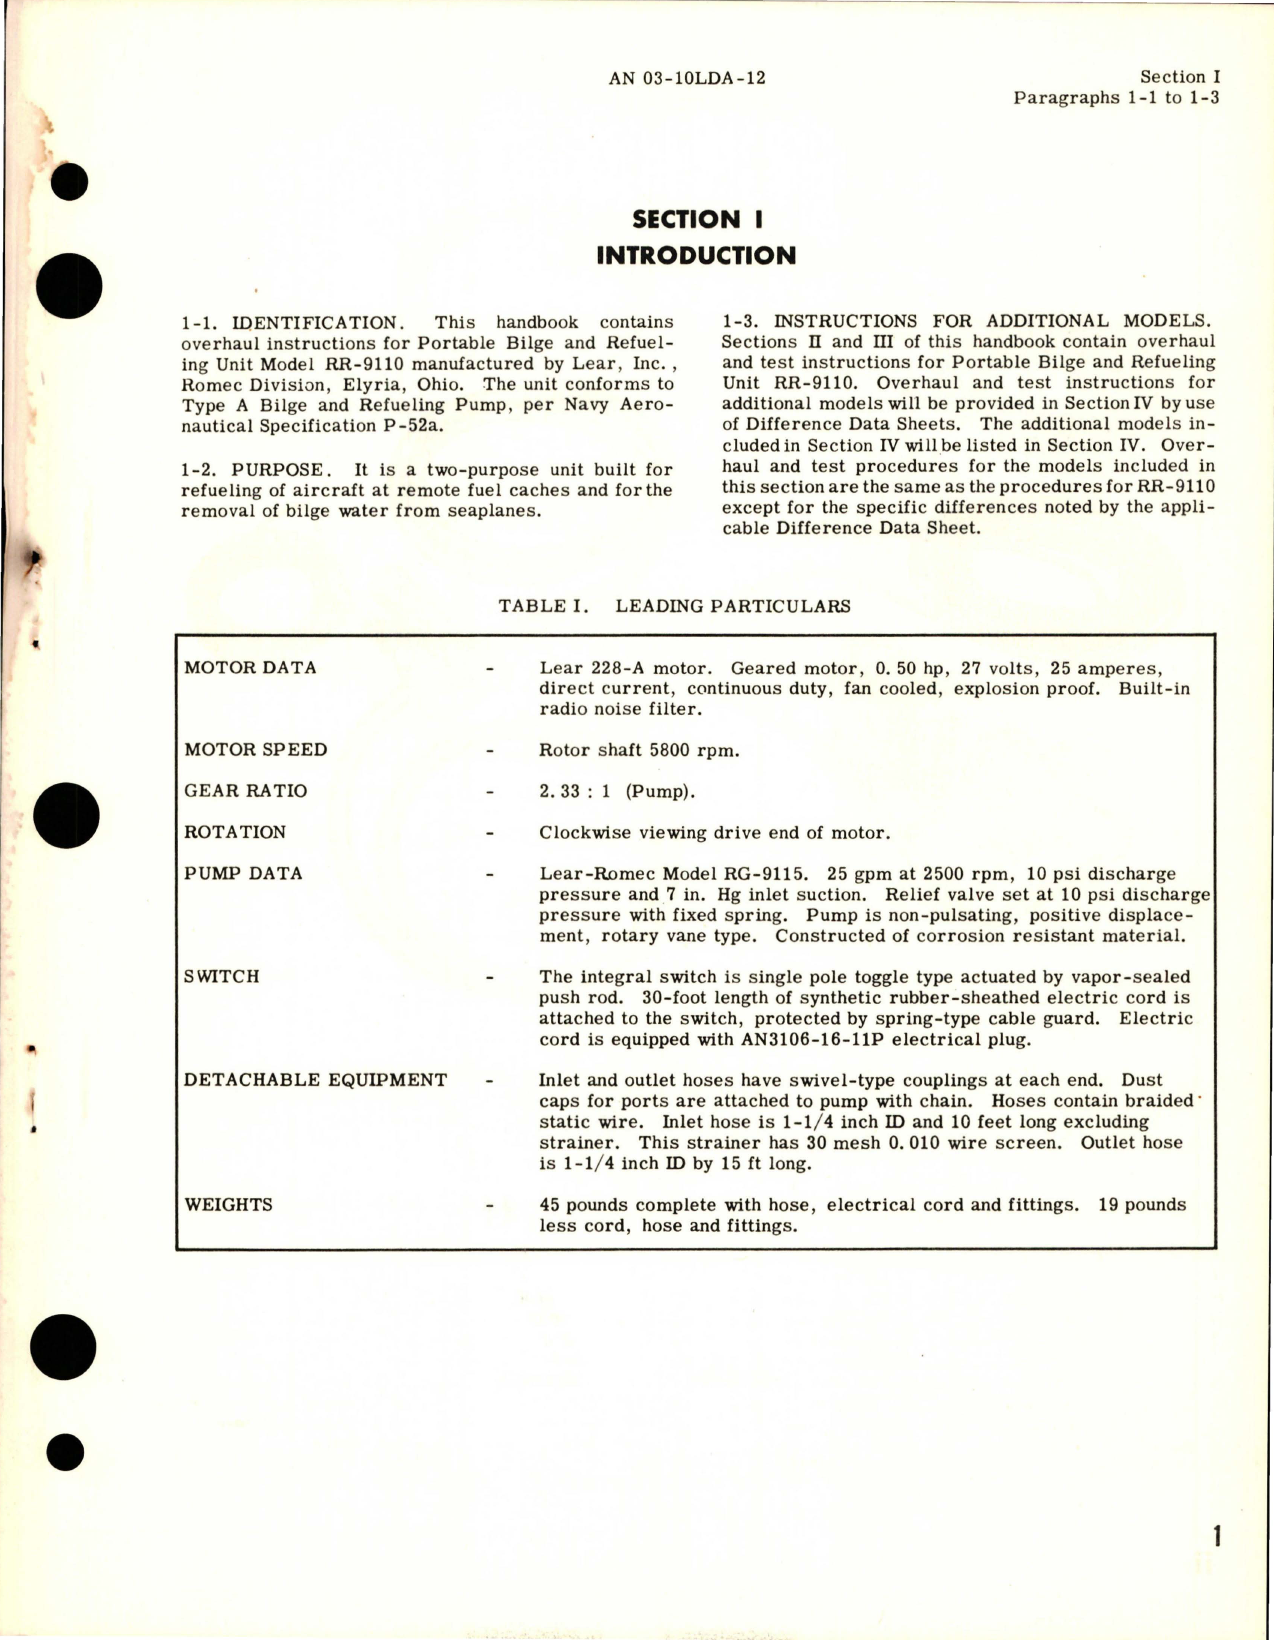 Sample page 5 from AirCorps Library document: Overhaul Instructions for Portable Bilge & Refueling Unit - Models RR-9110